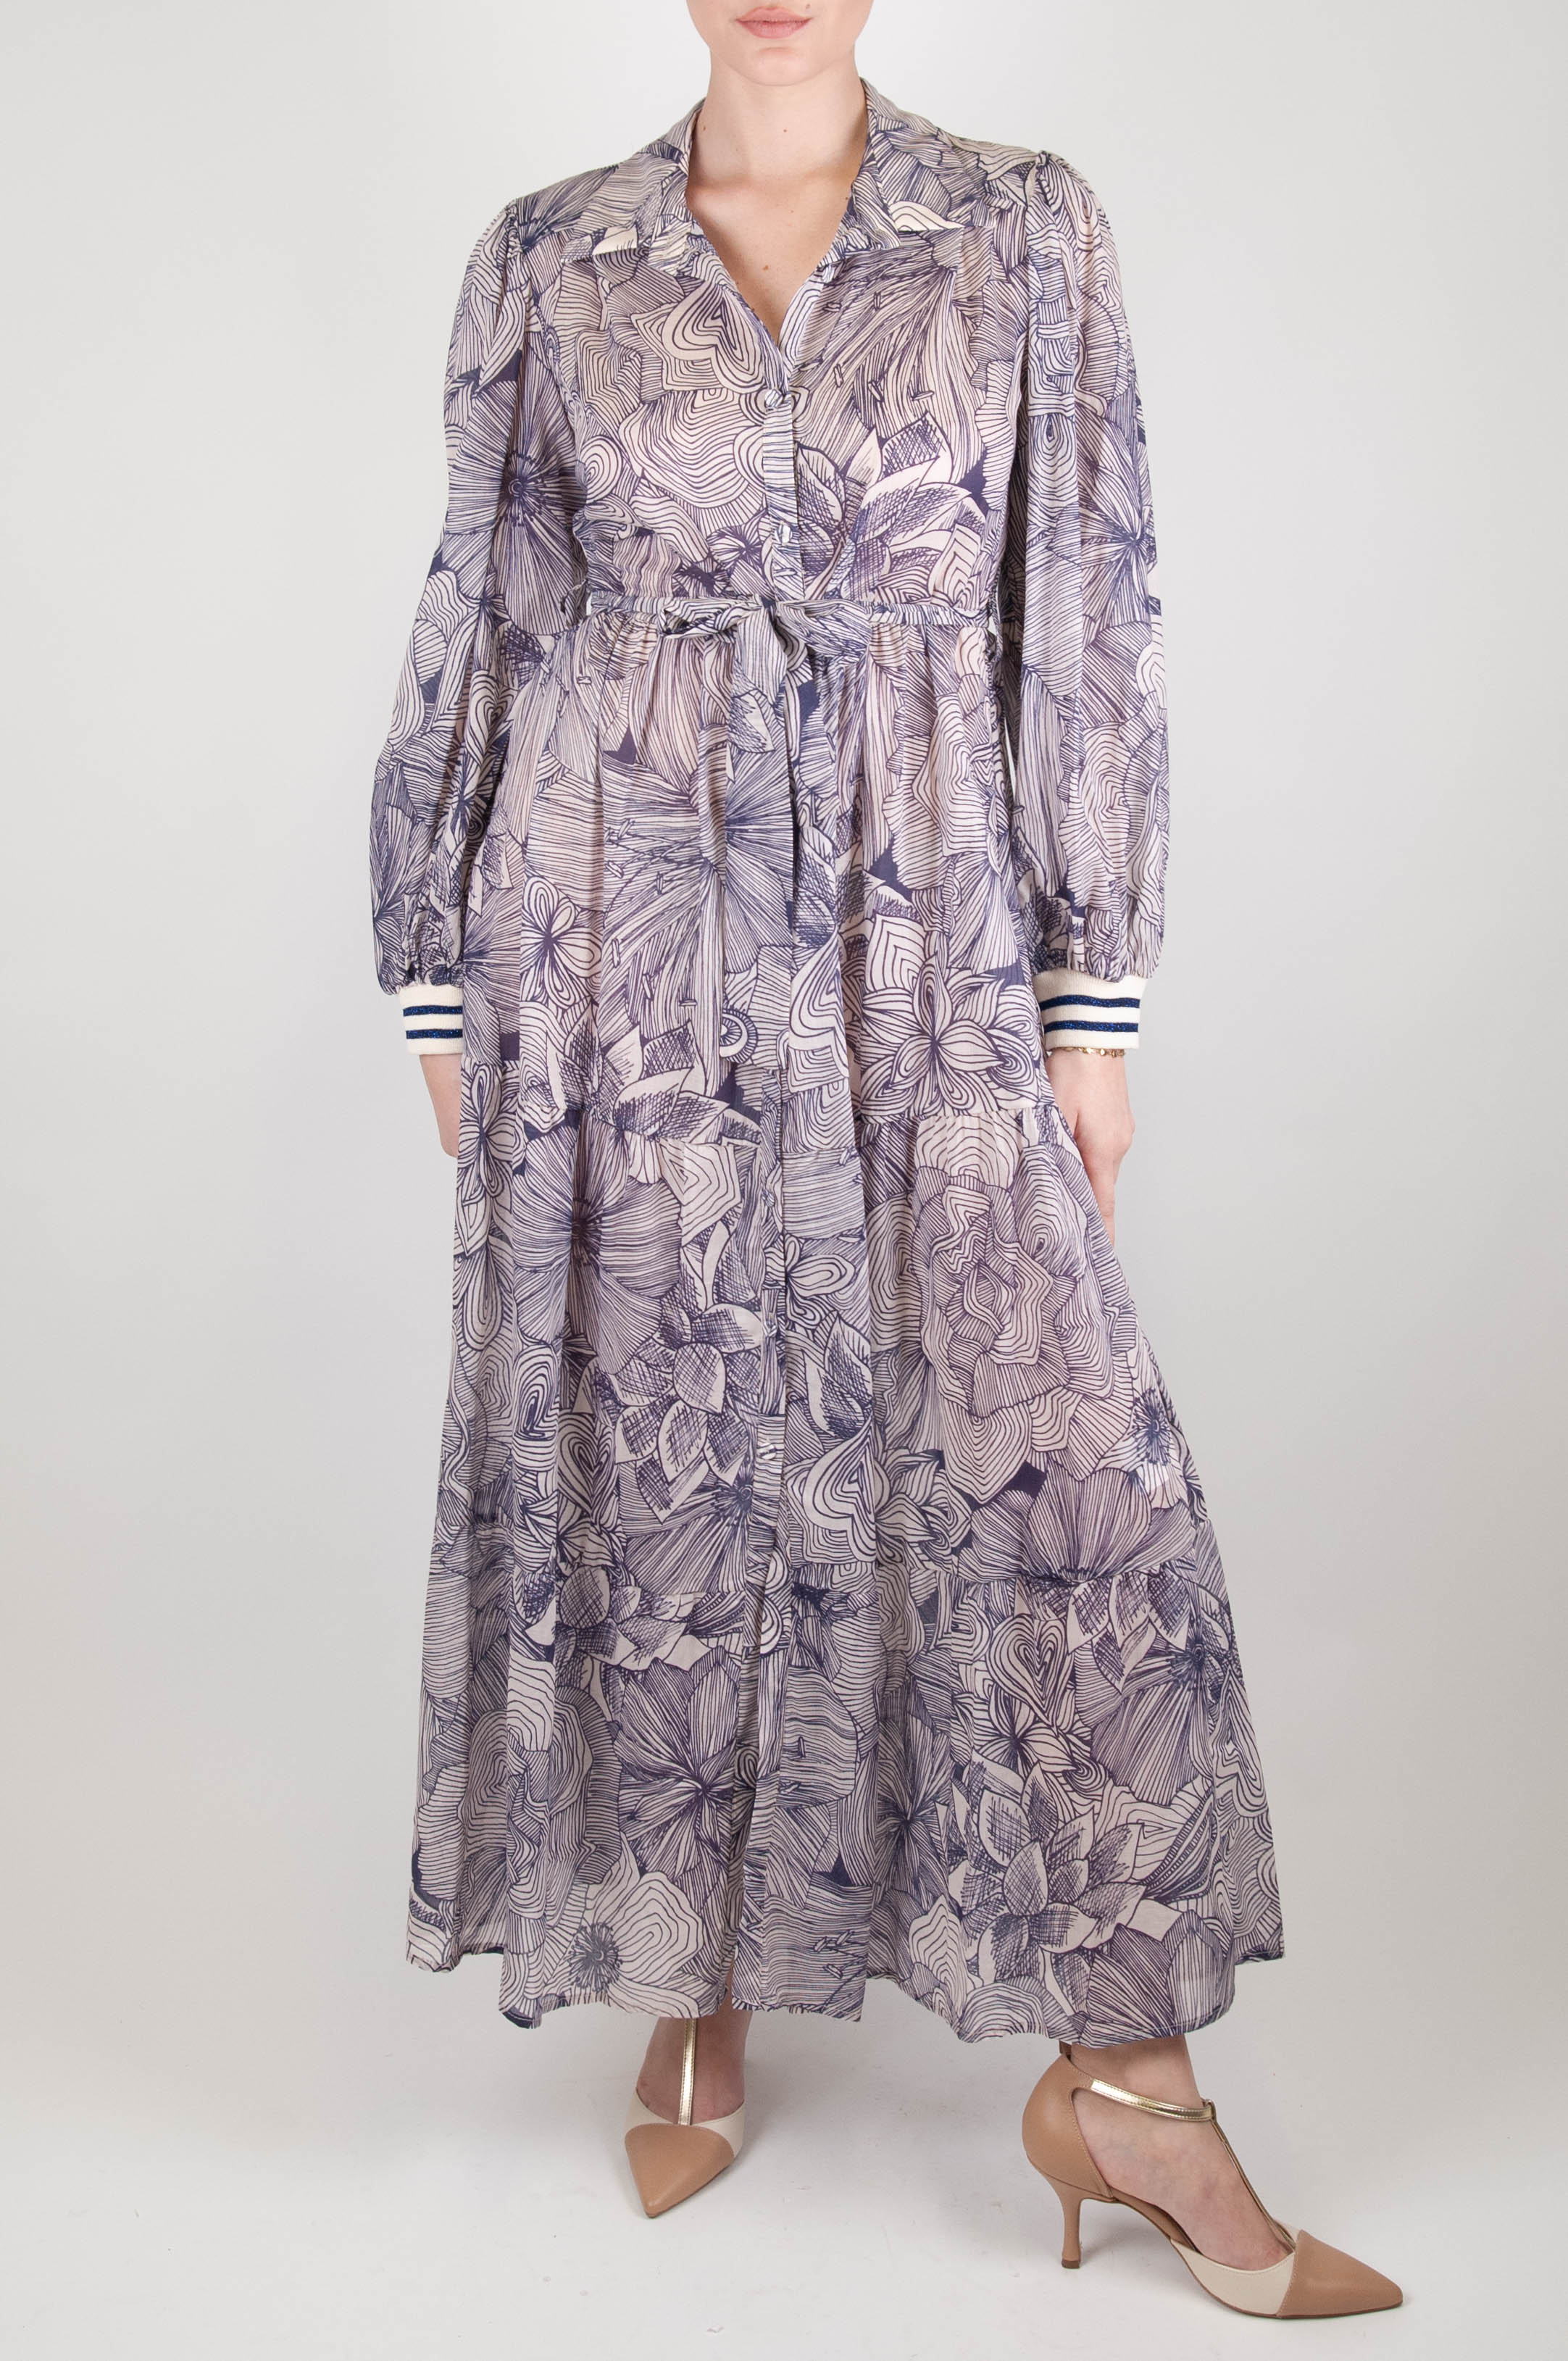 Tension in - Floral patterned shirtdress in cotton muslin